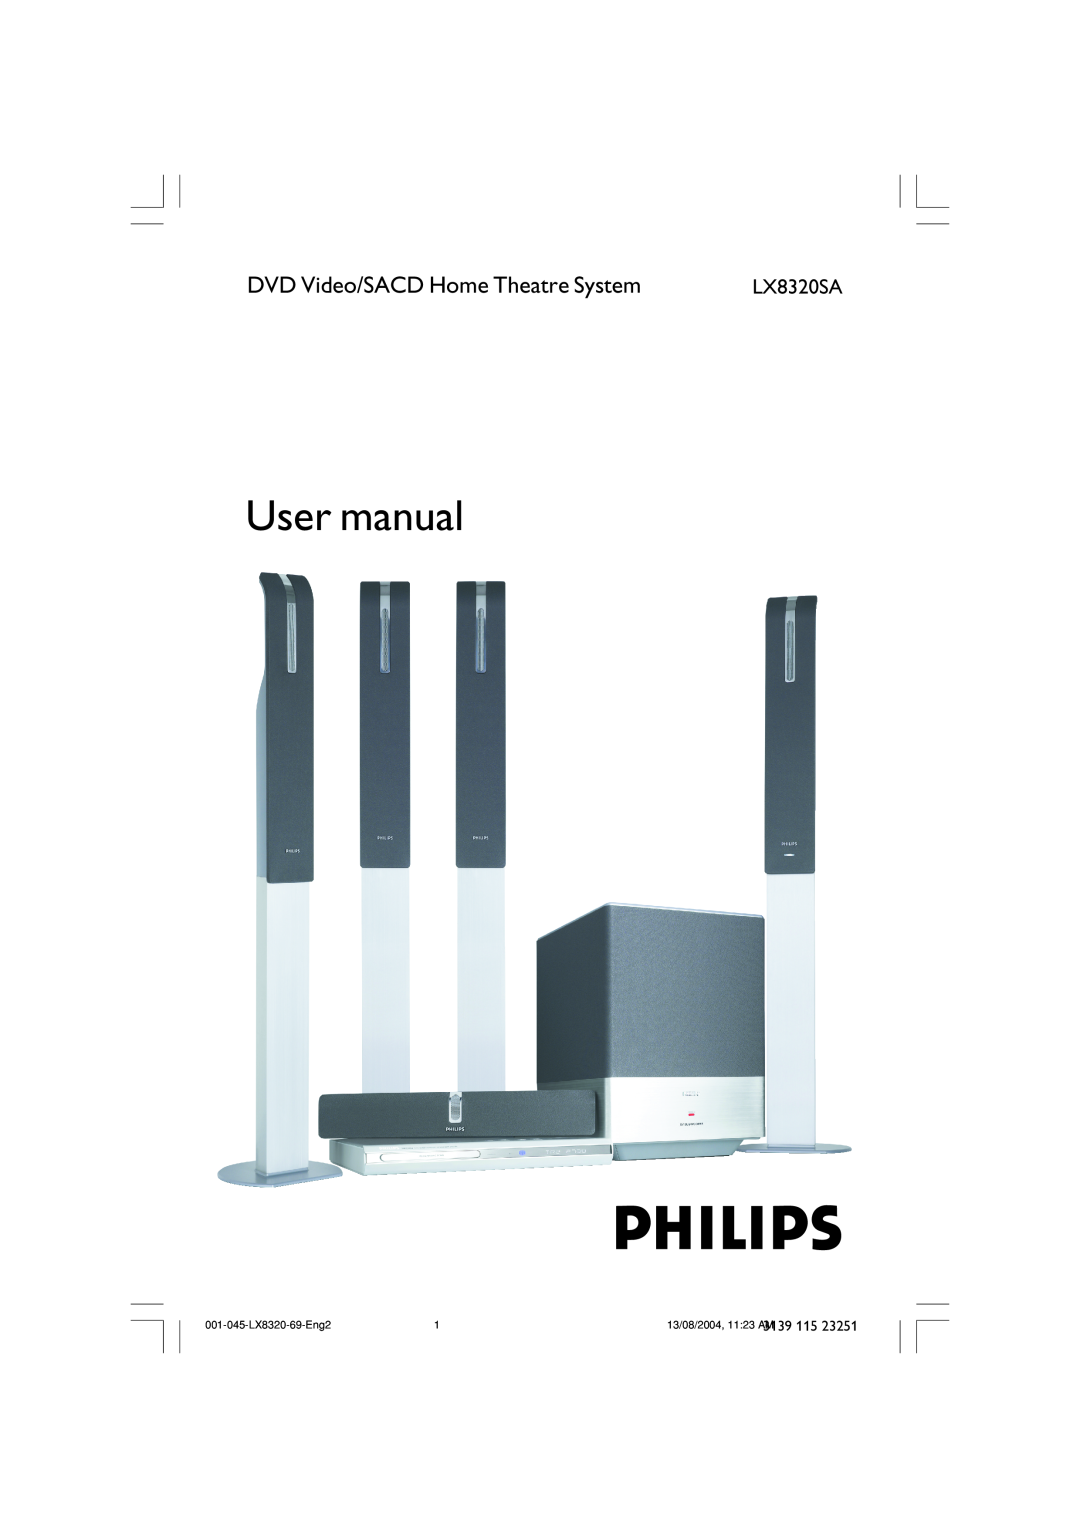 Philips user manual DVD Video/SACD Home Theatre System, LX8320SA, 001-045-LX8320-69-Eng2, 13/08/2004, 11 23 AM 